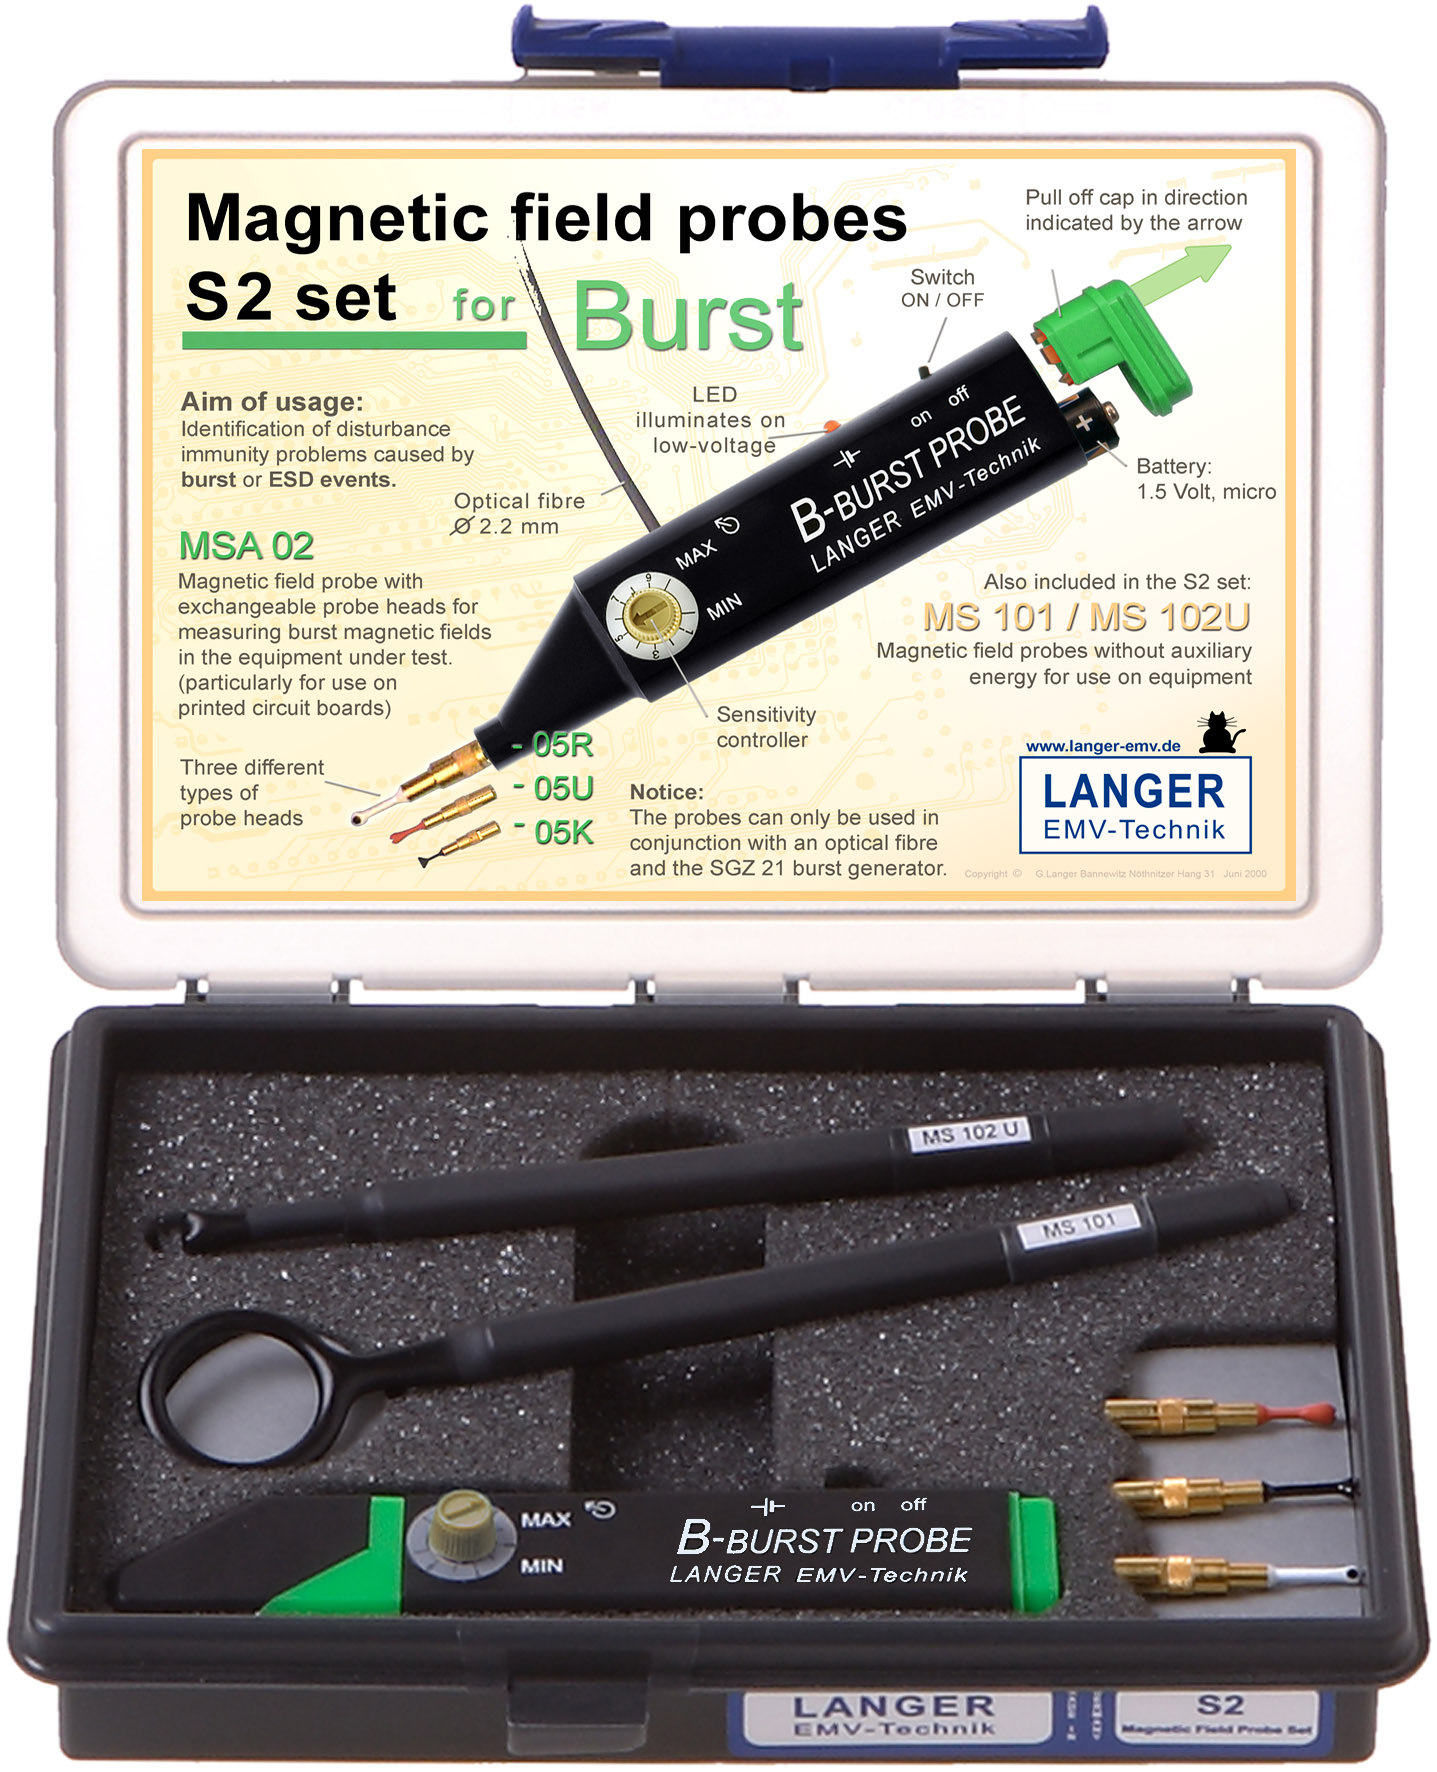 S2 set, Magnetic Field Probes for E1